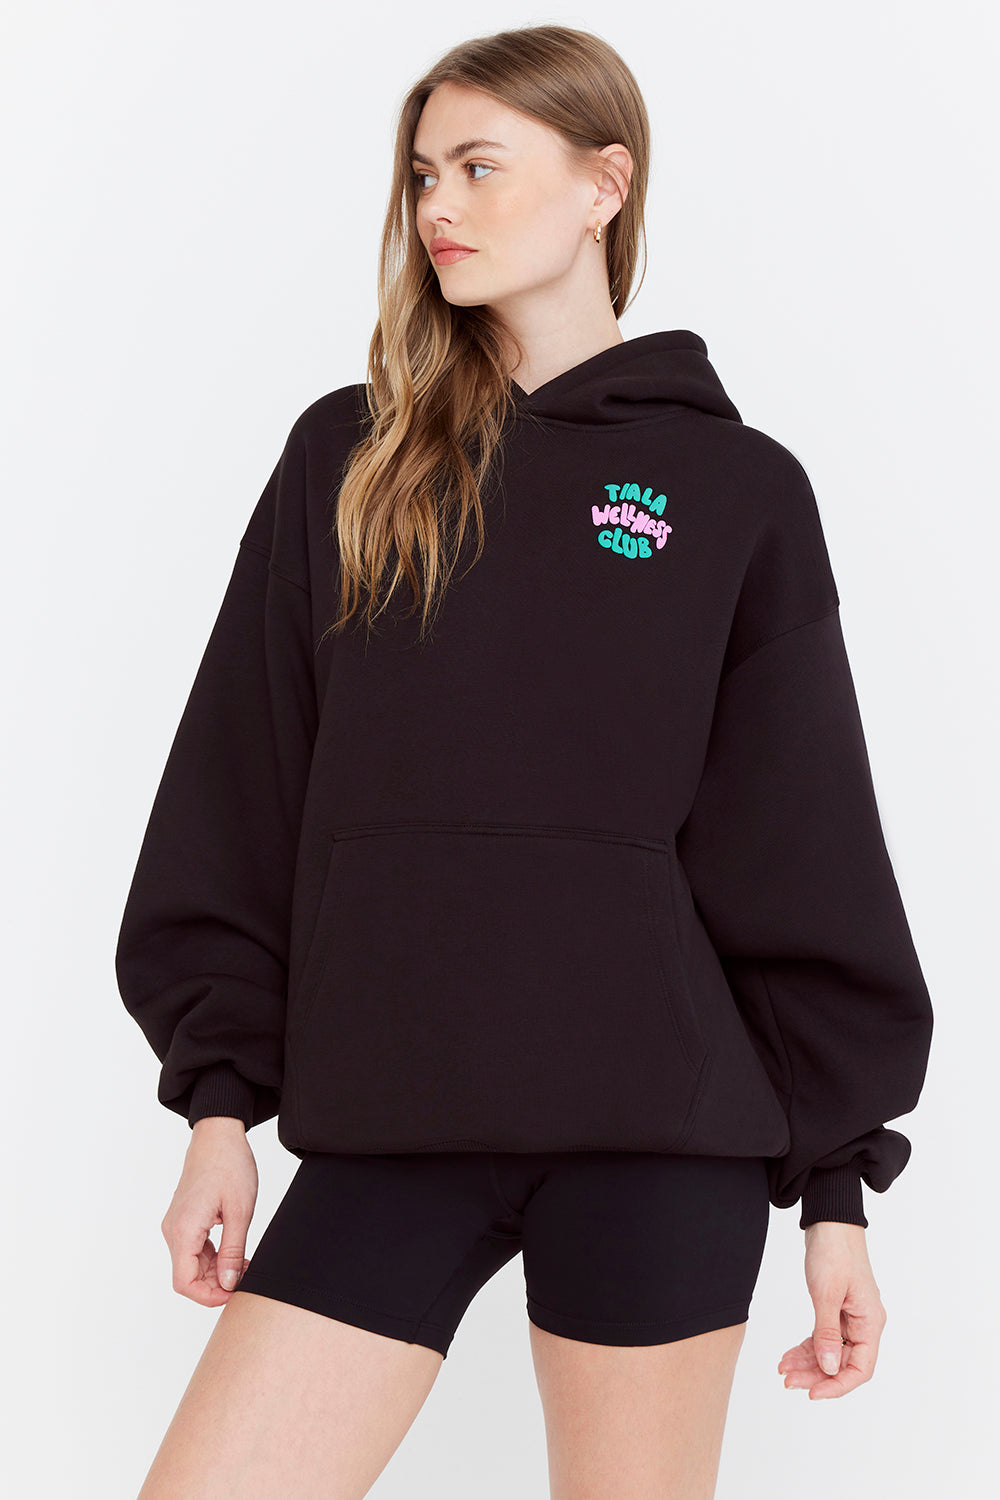 GOING PLACES OVERSIZED CLUB HOODIE - BLACK – TALA